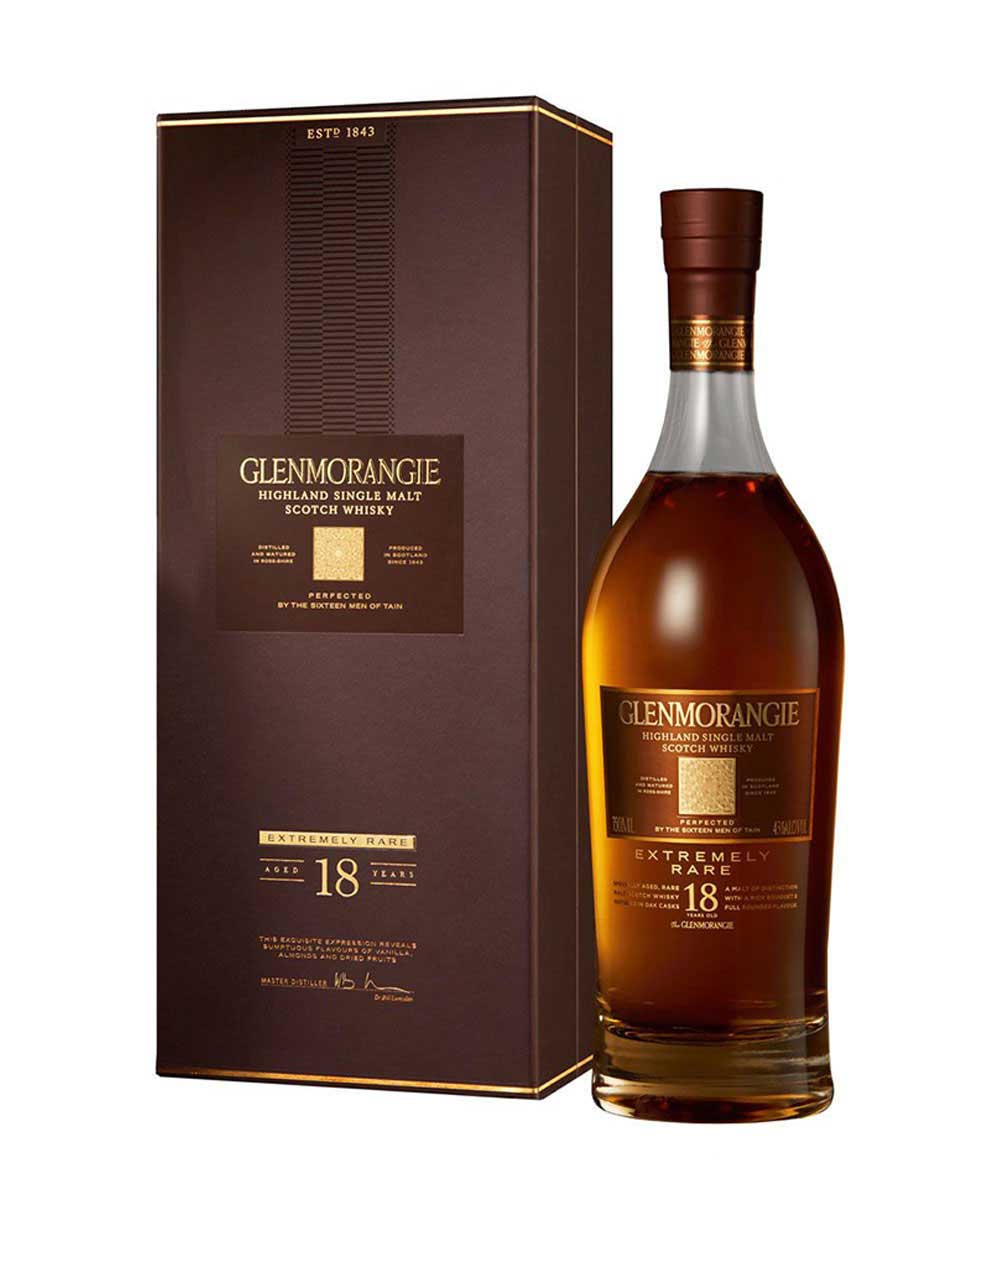 Tullamore D.E.W. 12 Year Old Special Reserve